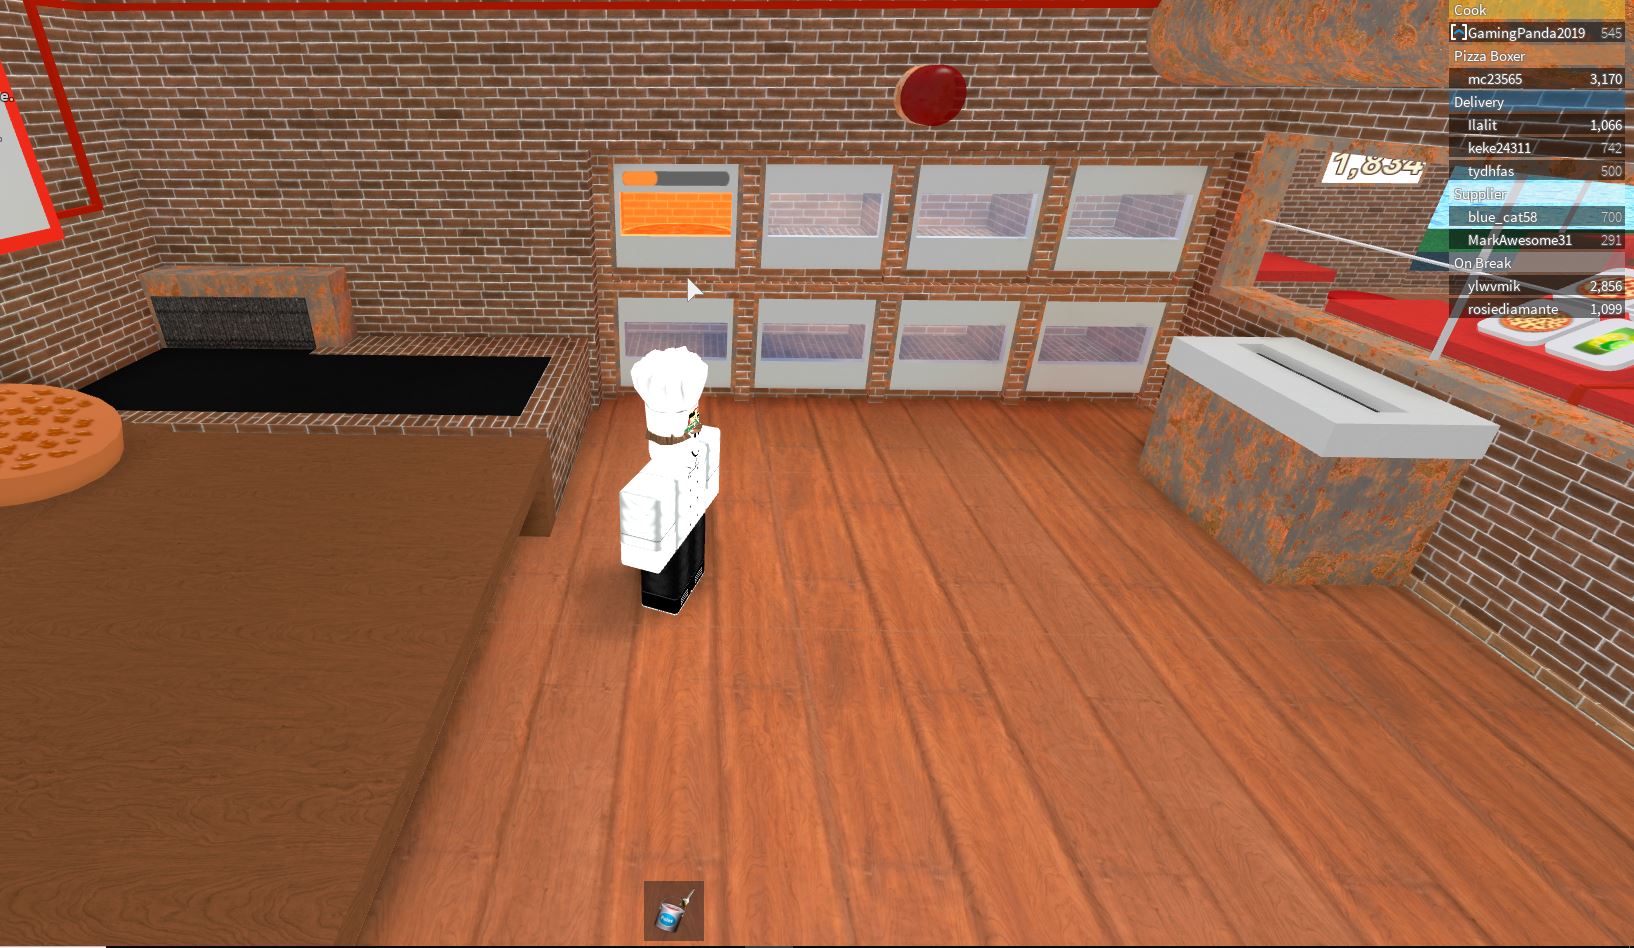 Roblox Work At A Pizza Place Secret Spots How To Get Free Roblox Robux Codes - codes for work at a pizza place roblox wiki